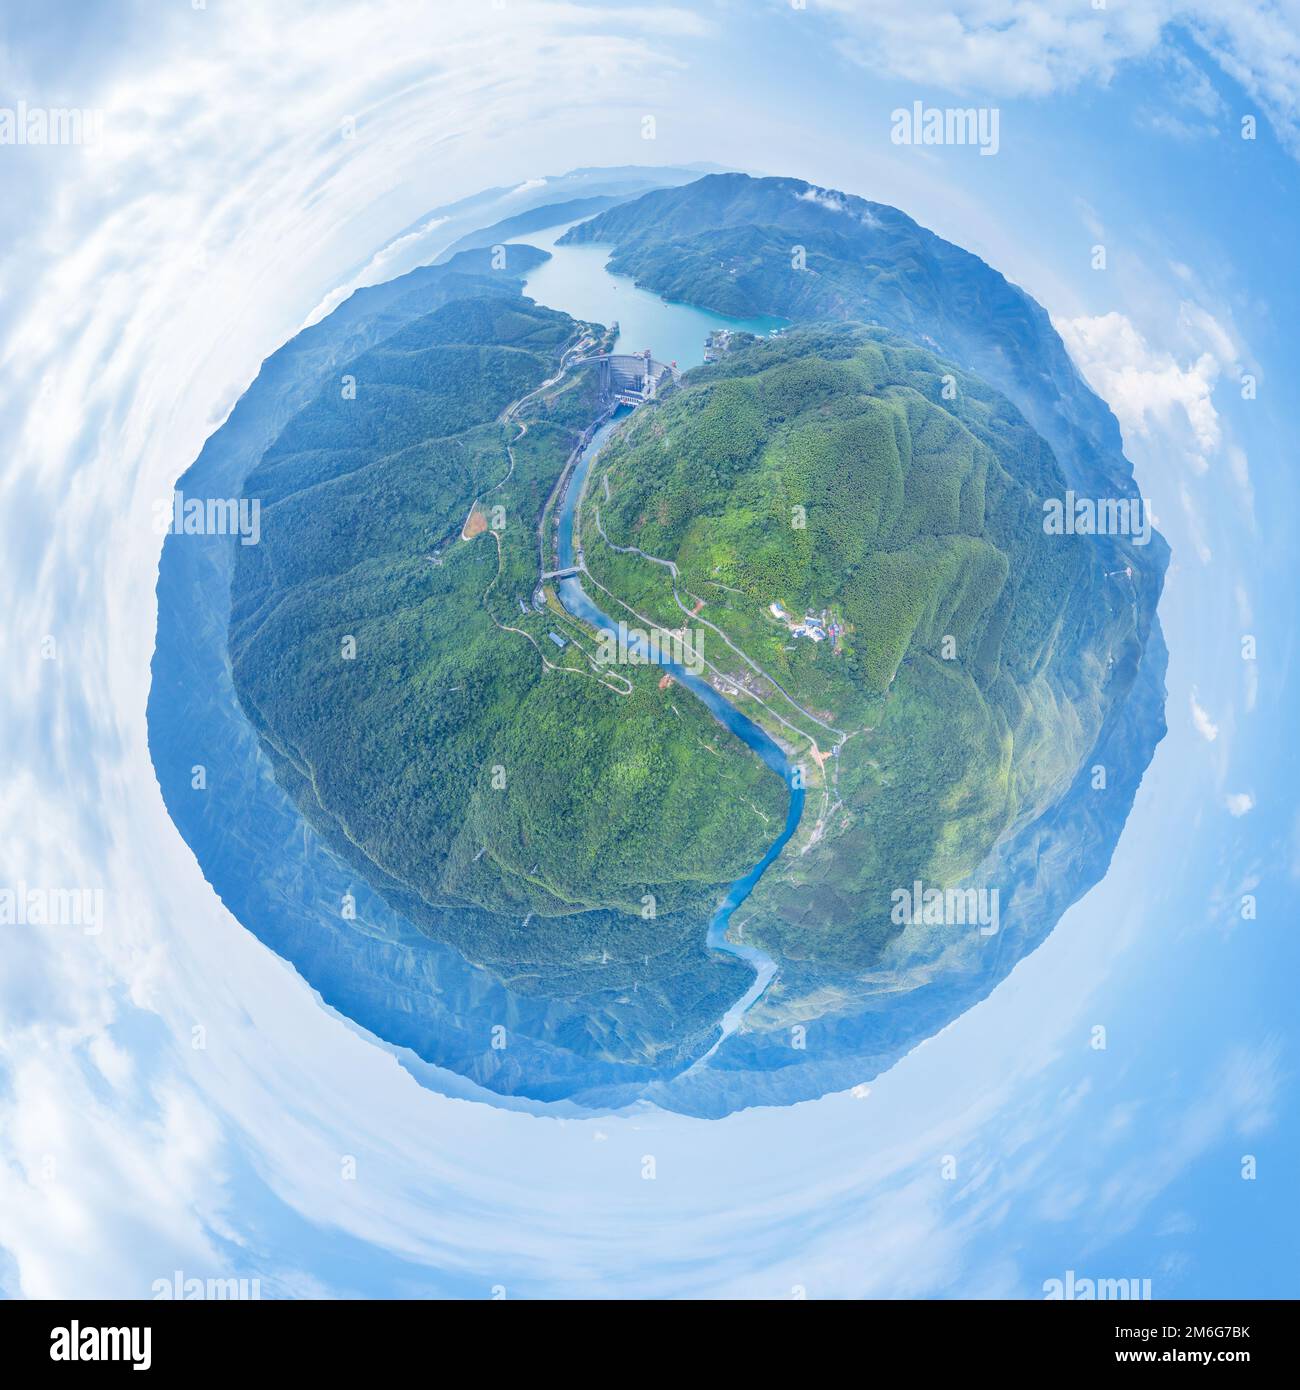 Little planet image of small hydroelectric station Stock Photo